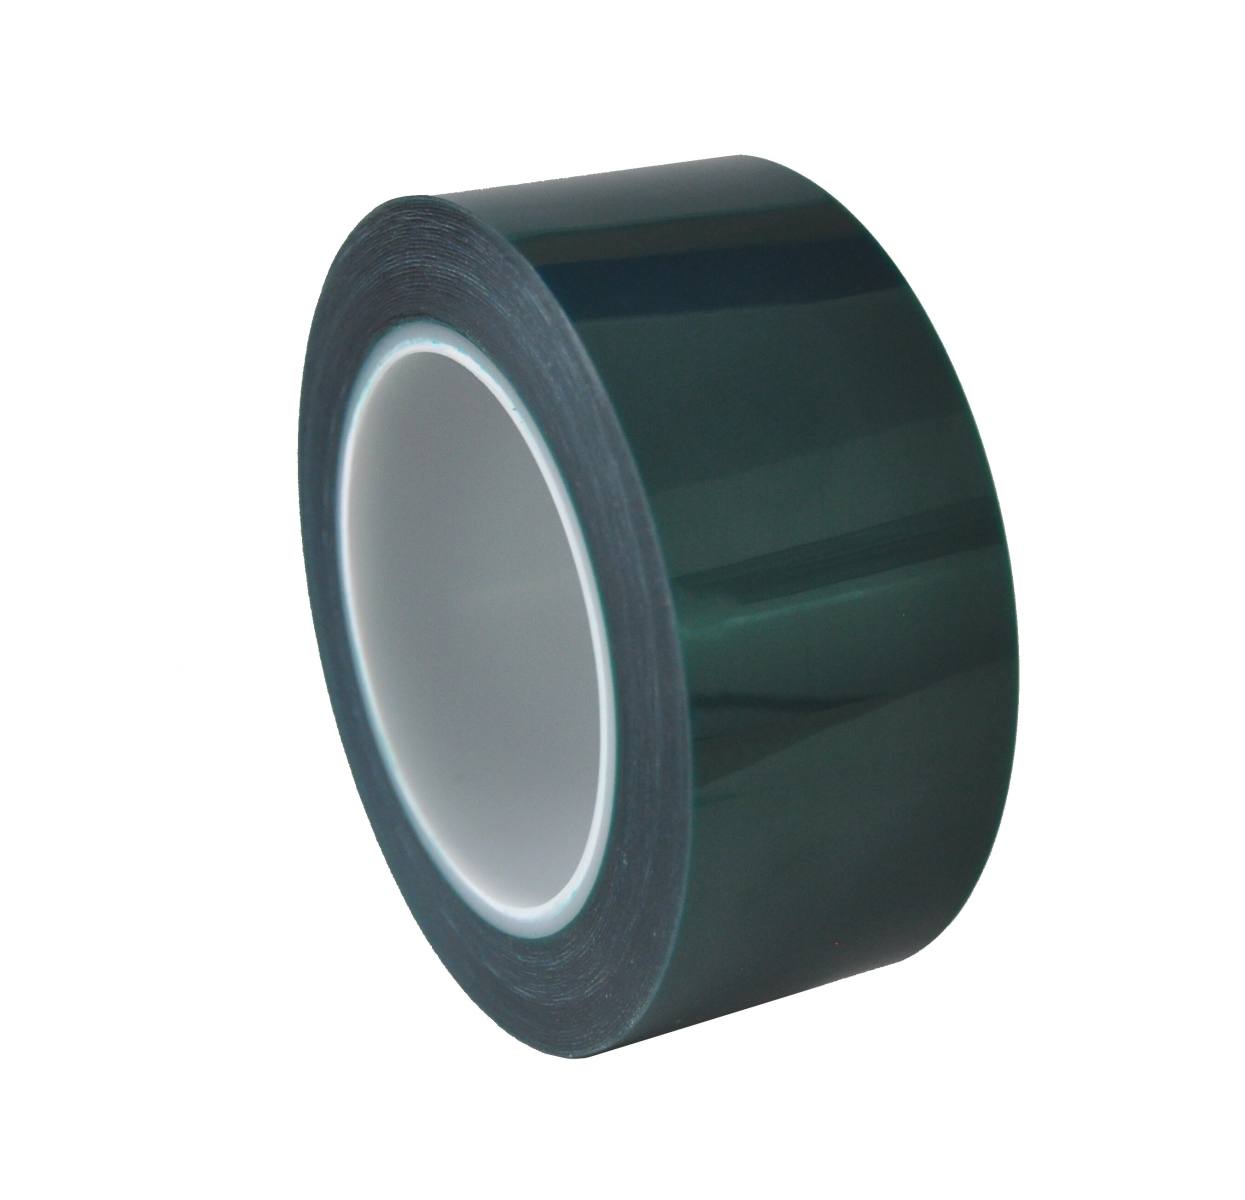 S-K-S 208G polyester adhesive tape, 50mmx66m, green